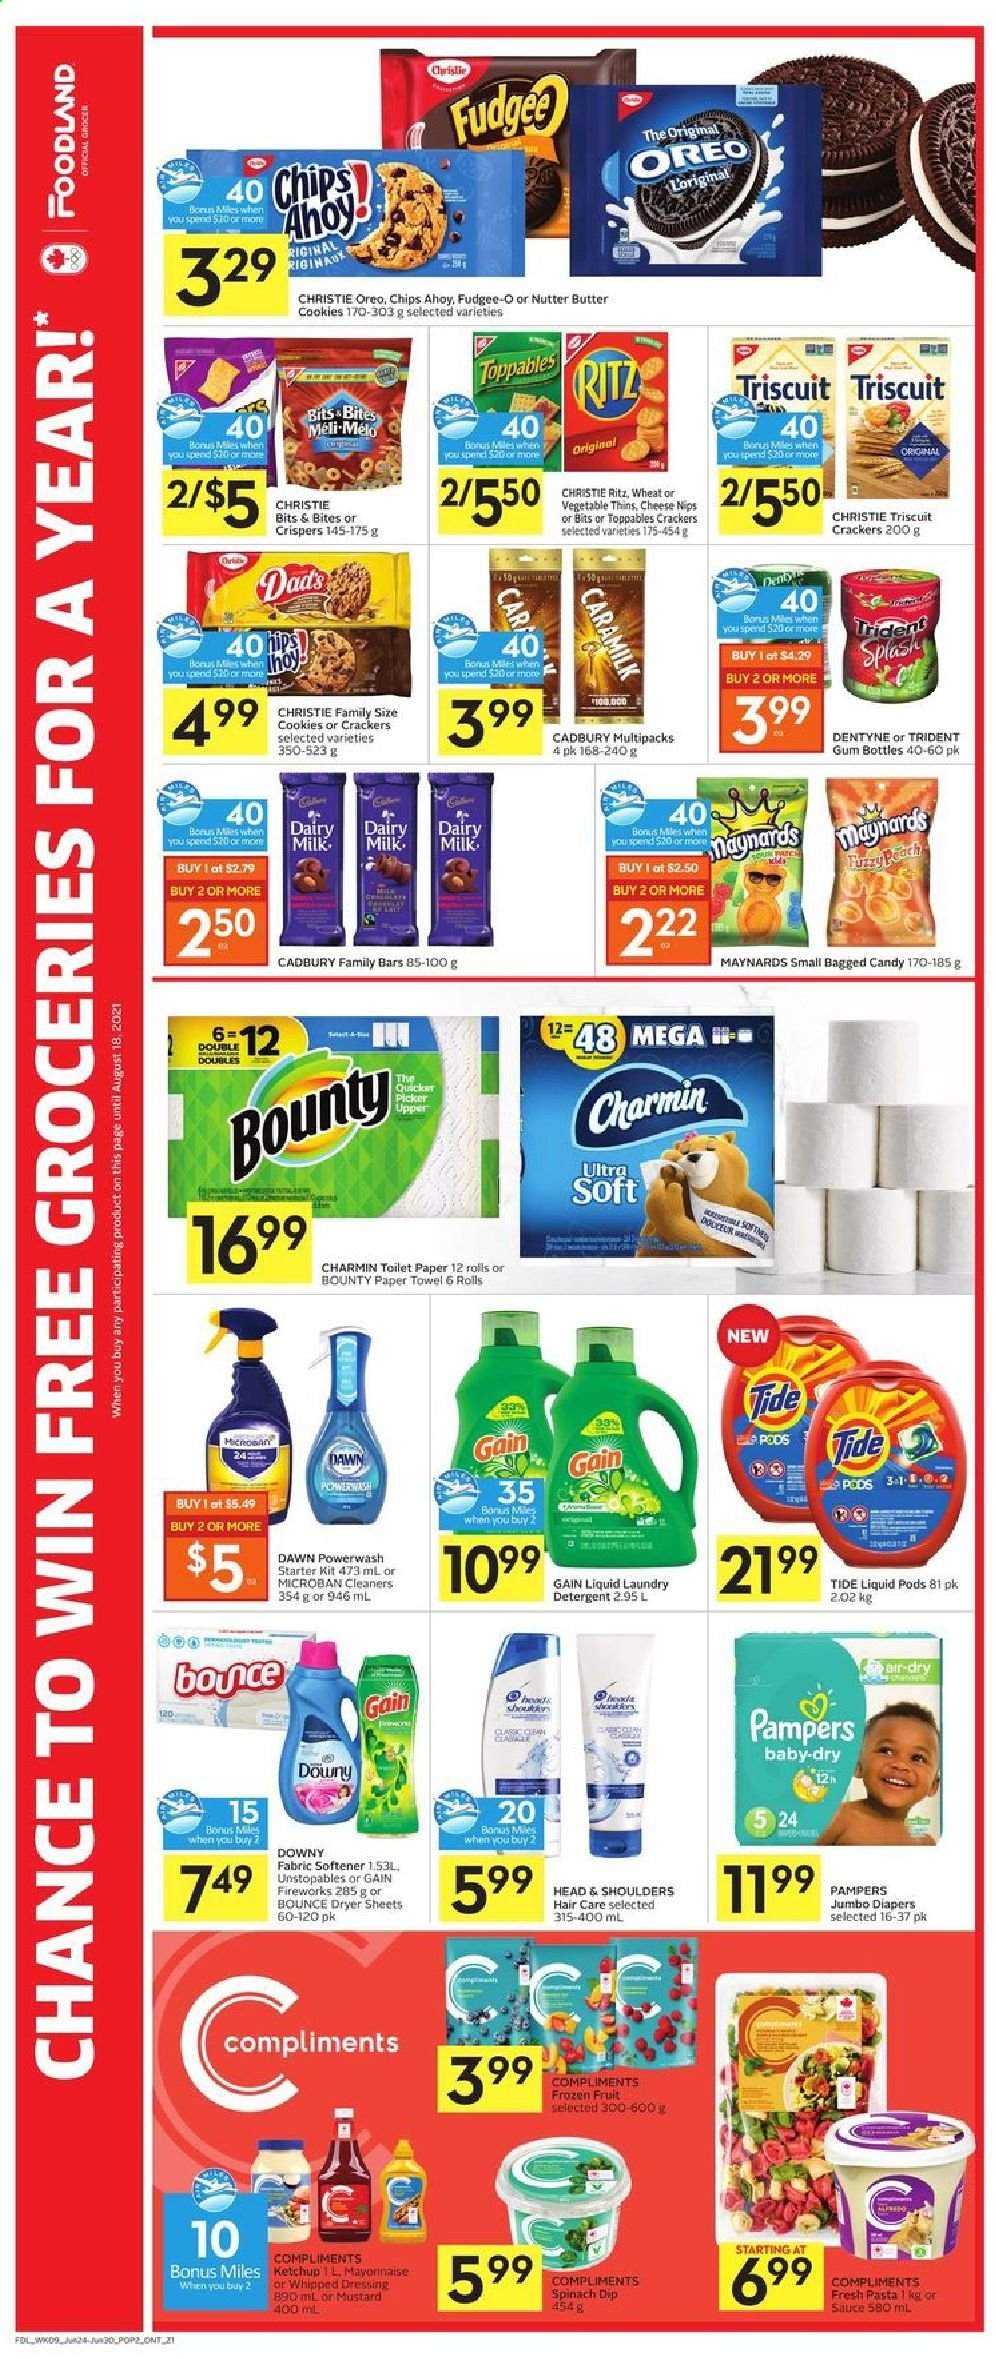 thumbnail - Foodland Flyer - June 24, 2021 - June 30, 2021 - Sales products - pasta, Oreo, mayonnaise, dip, spinach dip, frozen fruit, cookies, chocolate, butter cookies, Bounty, crackers, chewing gum, Cadbury, Dairy Milk, Trident, NIPS, RITZ, chocolate bar, Candy, sweets, bars, Thins, salty snack, mustard, ketchup, dressing, Pampers, nappies, toilet paper, kitchen towels, paper towels, Charmin, detergent, Gain, cleaner, Tide, Unstopables, fabric softener, laundry detergent, Bounce, dryer sheets, Gain Fireworks, Downy Laundry, hair products, Head & Shoulders. Page 3.